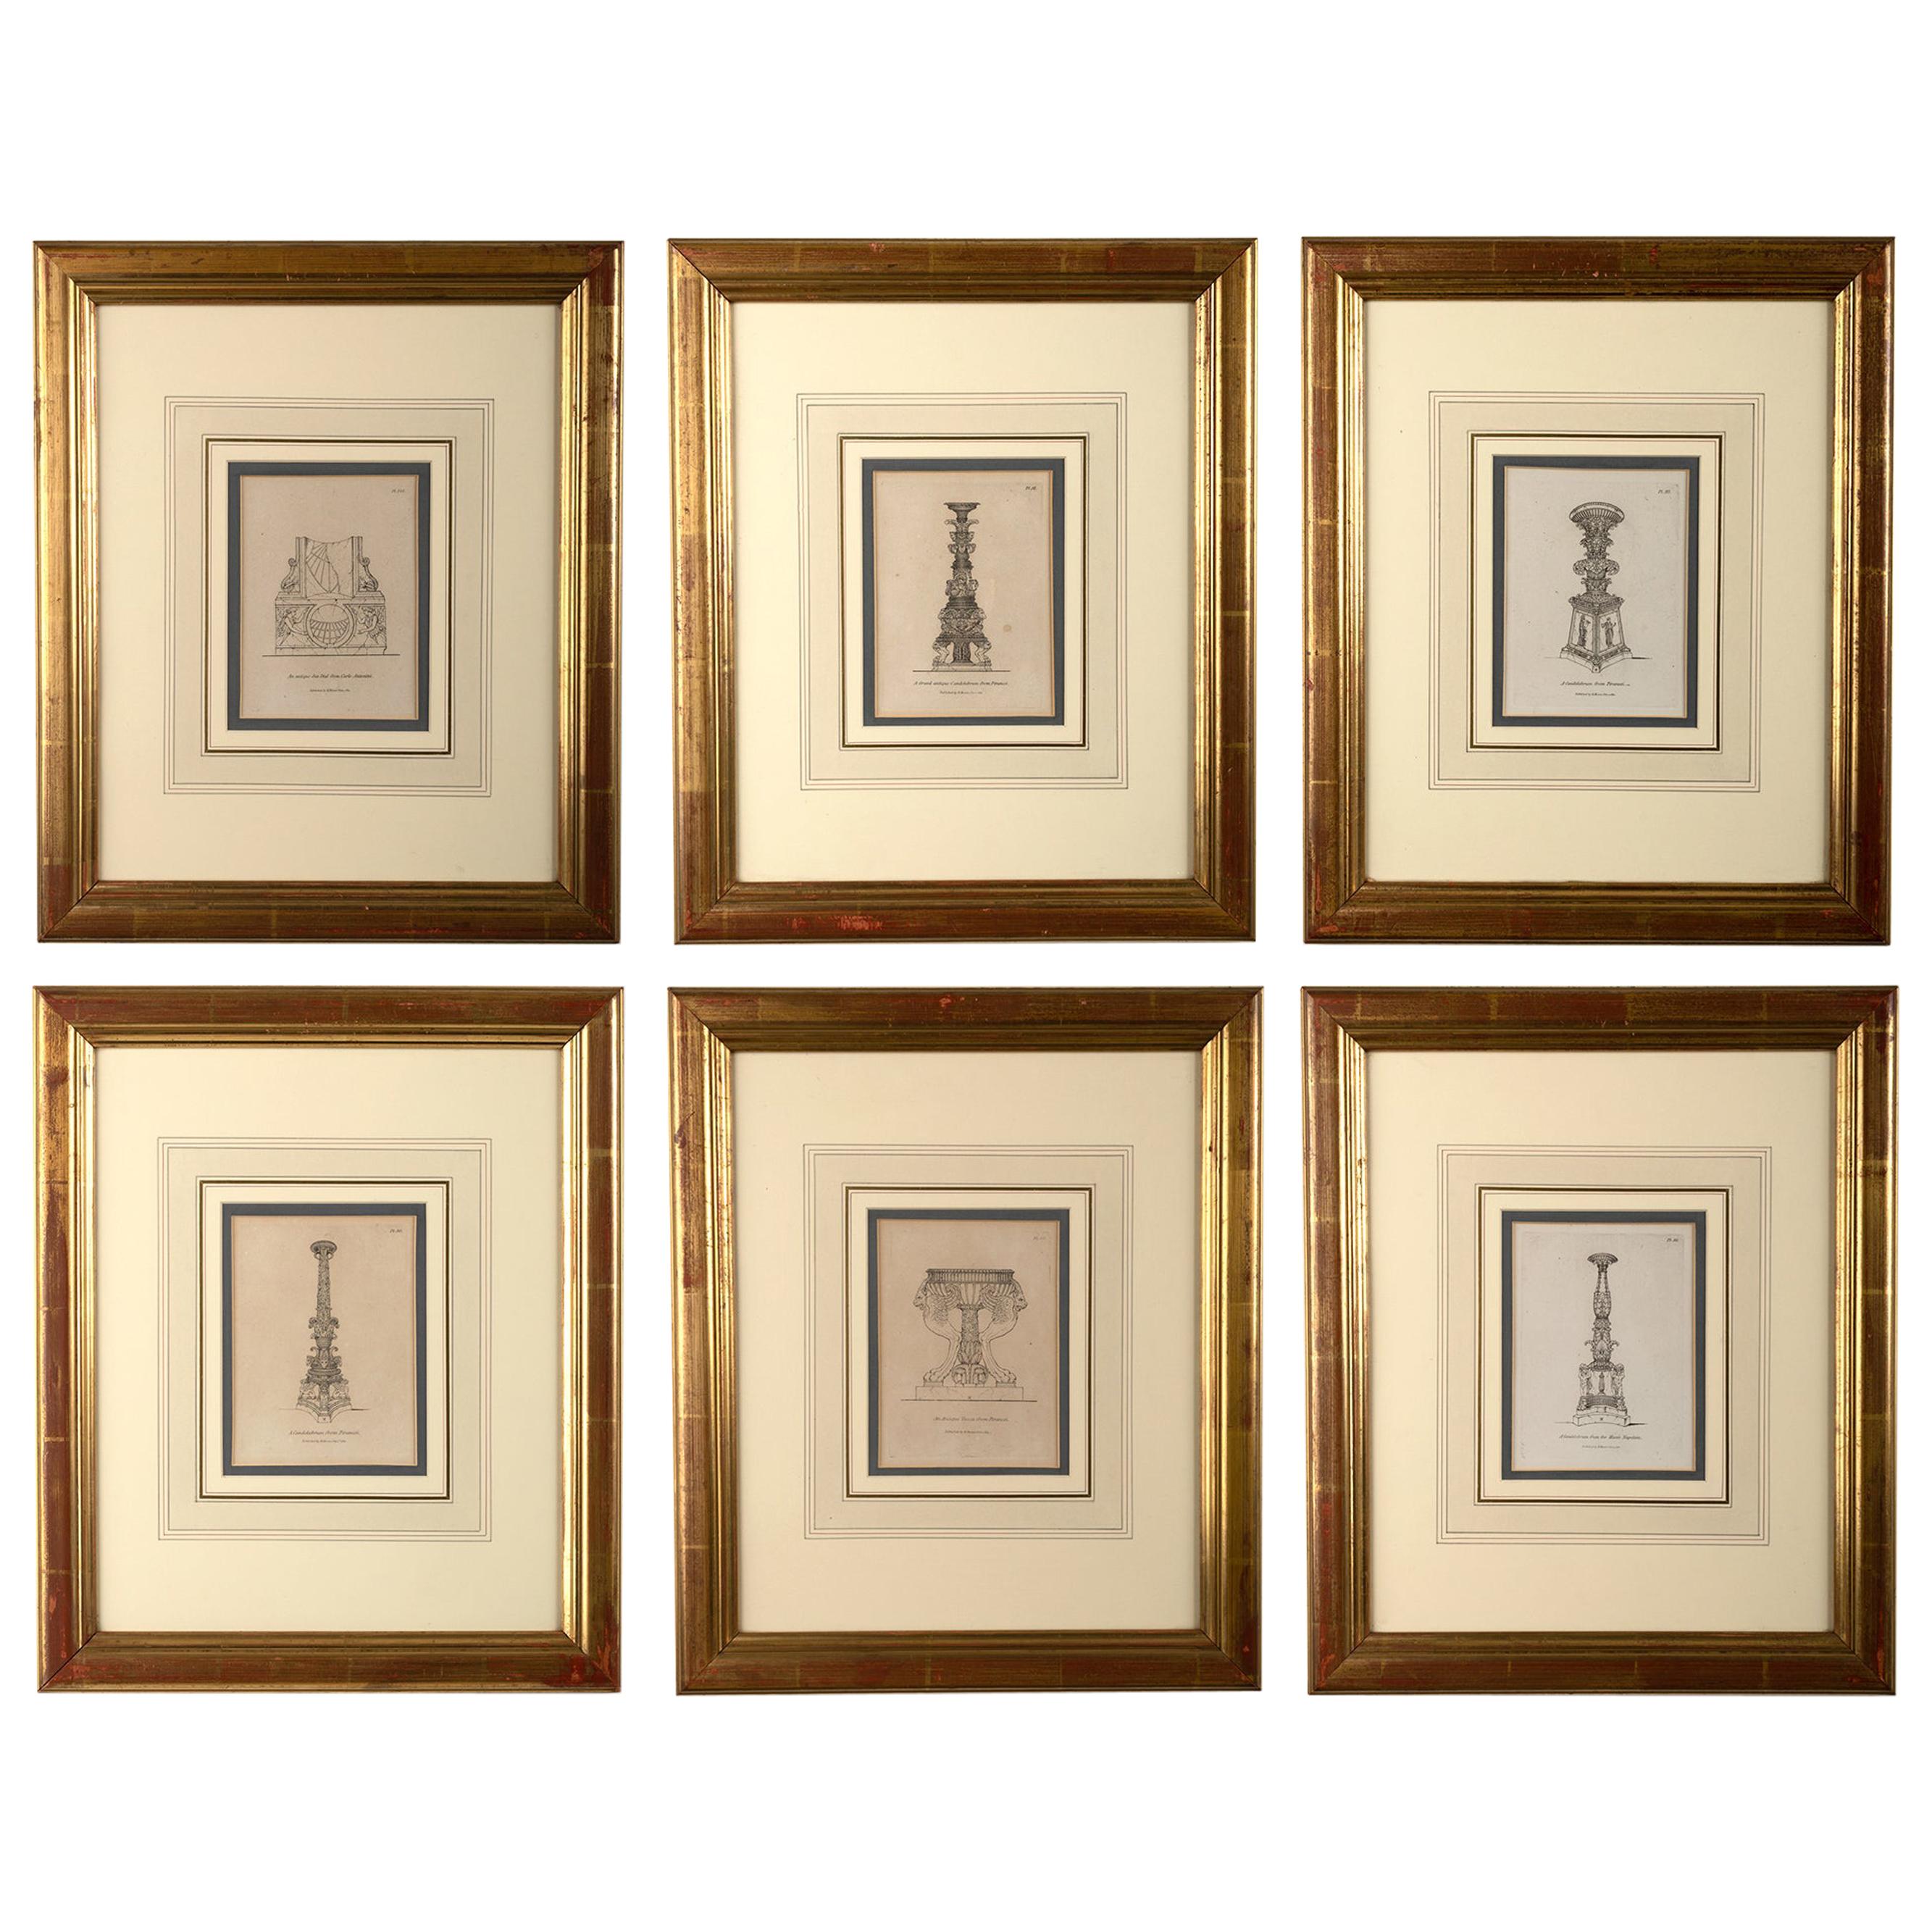 Collection of Six Framed Antique 19th Century Henry Moses Engravings, circa 1811